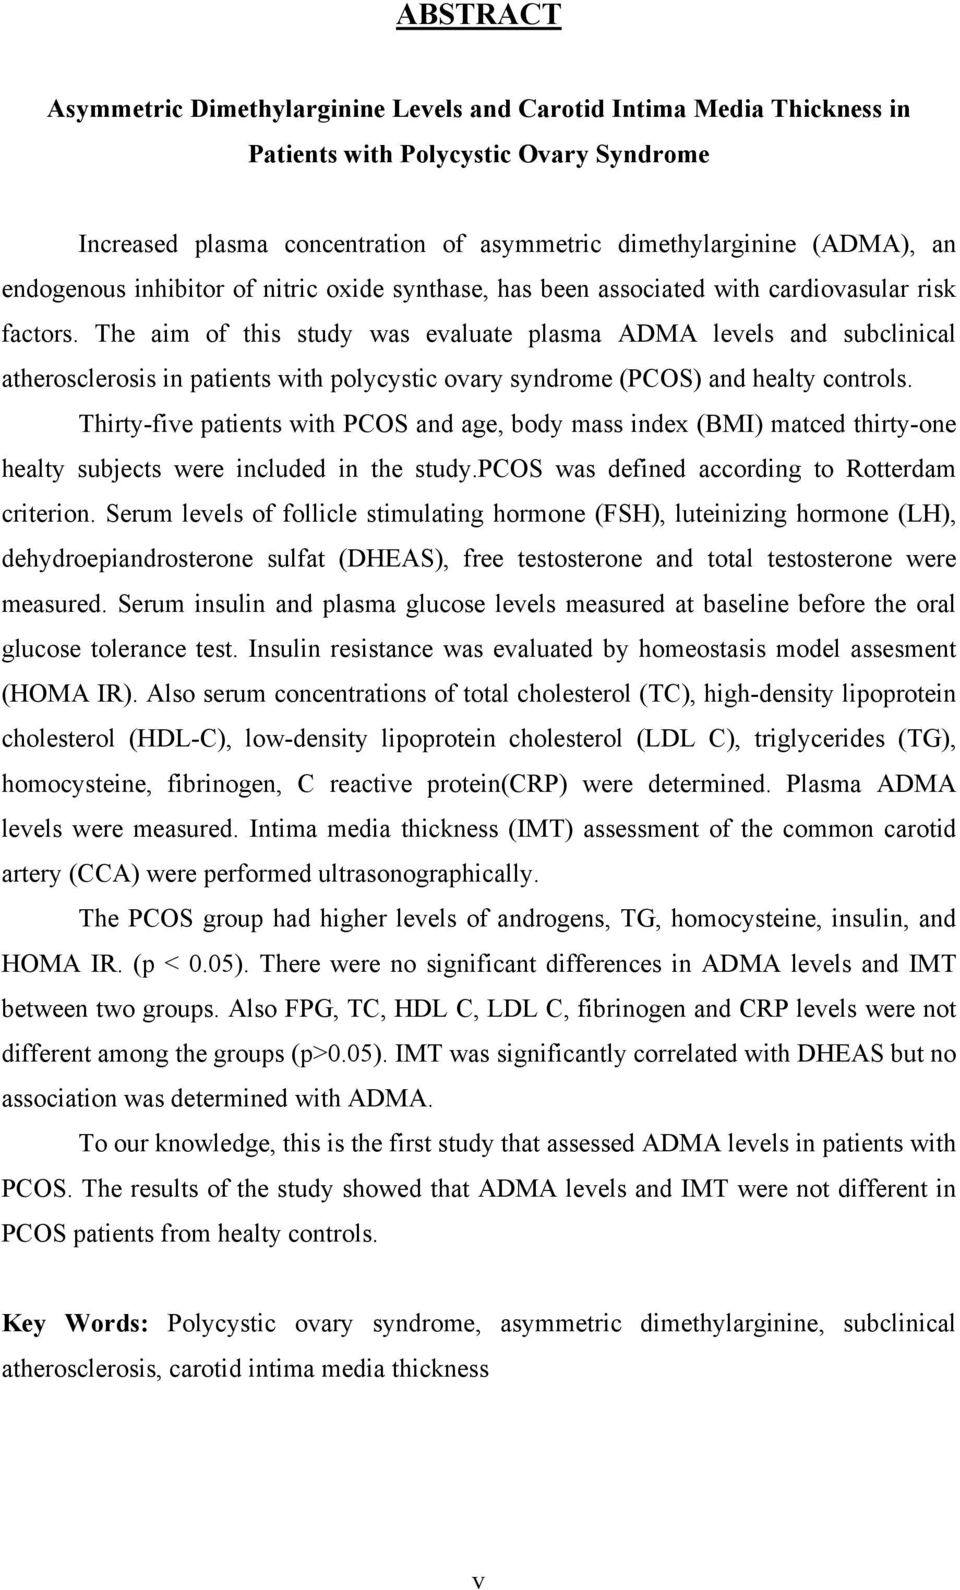 The aim of this study was evaluate plasma ADMA levels and subclinical atherosclerosis in patients with polycystic ovary syndrome (PCOS) and healty controls.